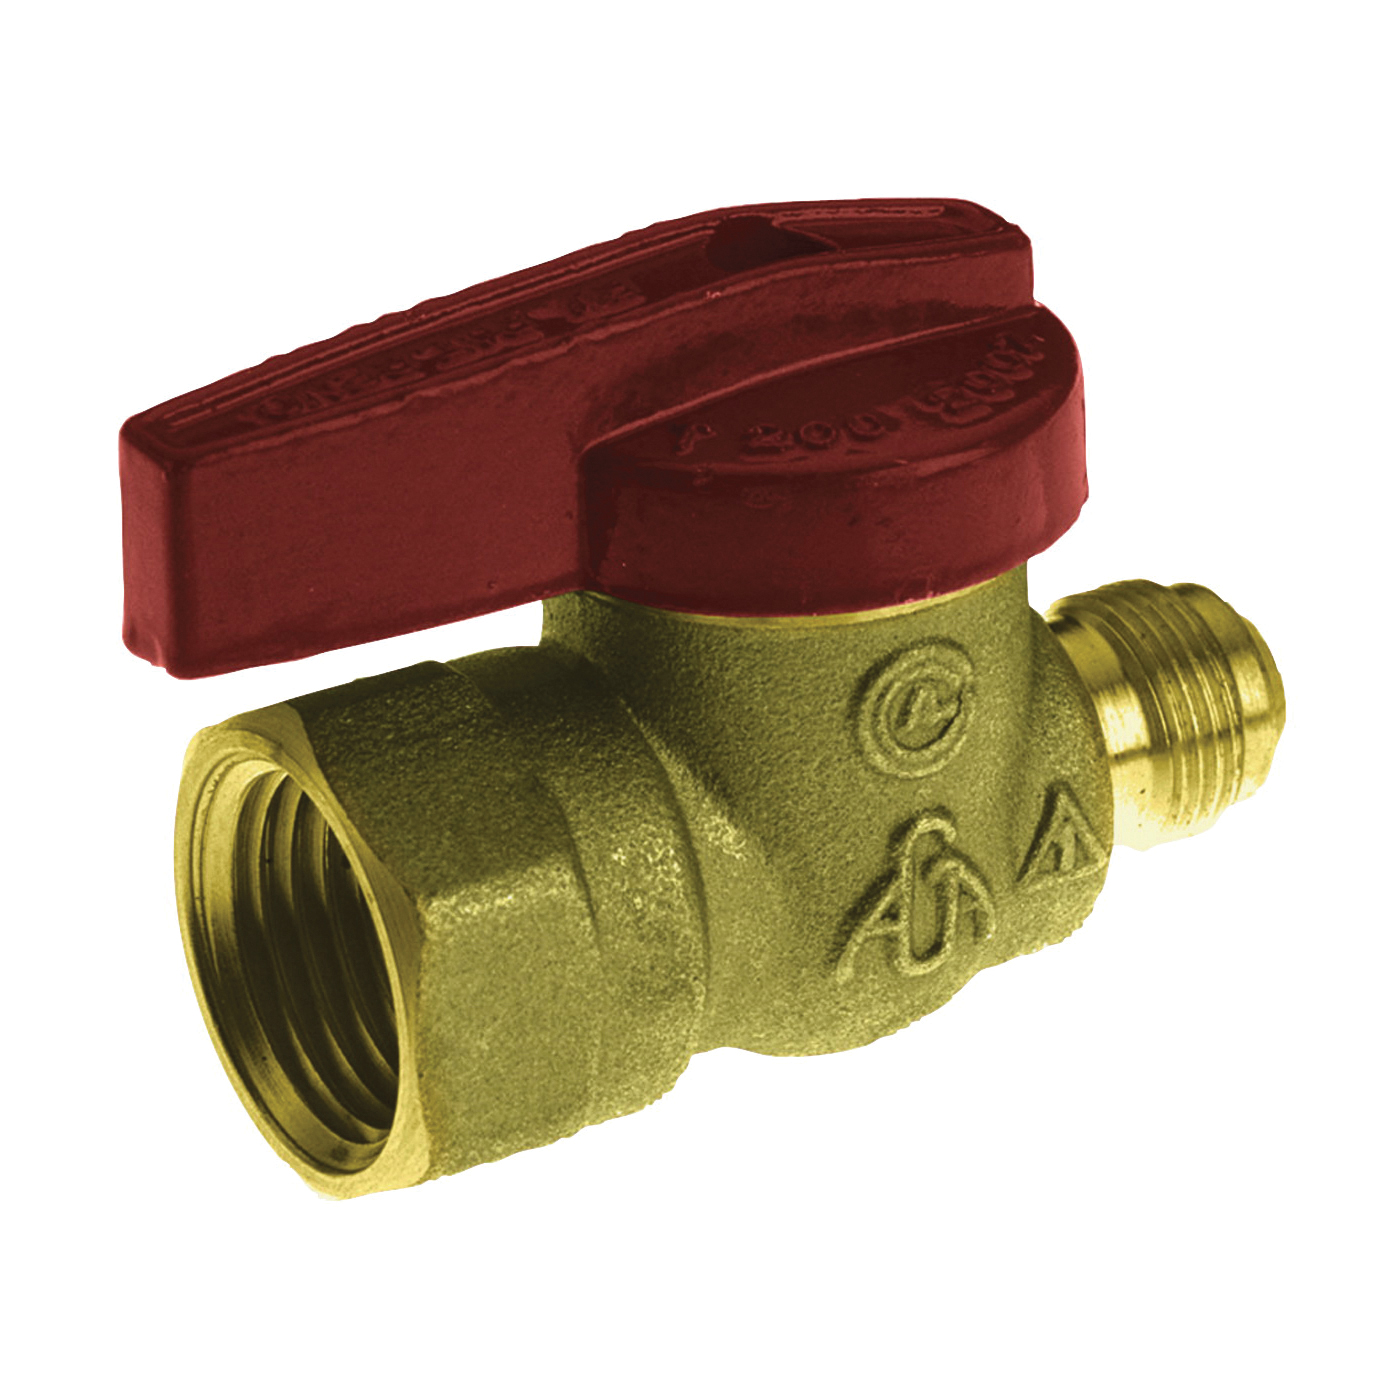 117-592 Gas Ball Valve, 9/16 x 1/2 in Connection, Flare x FPT, 200 psi Pressure, Manual Actuator, Brass Body